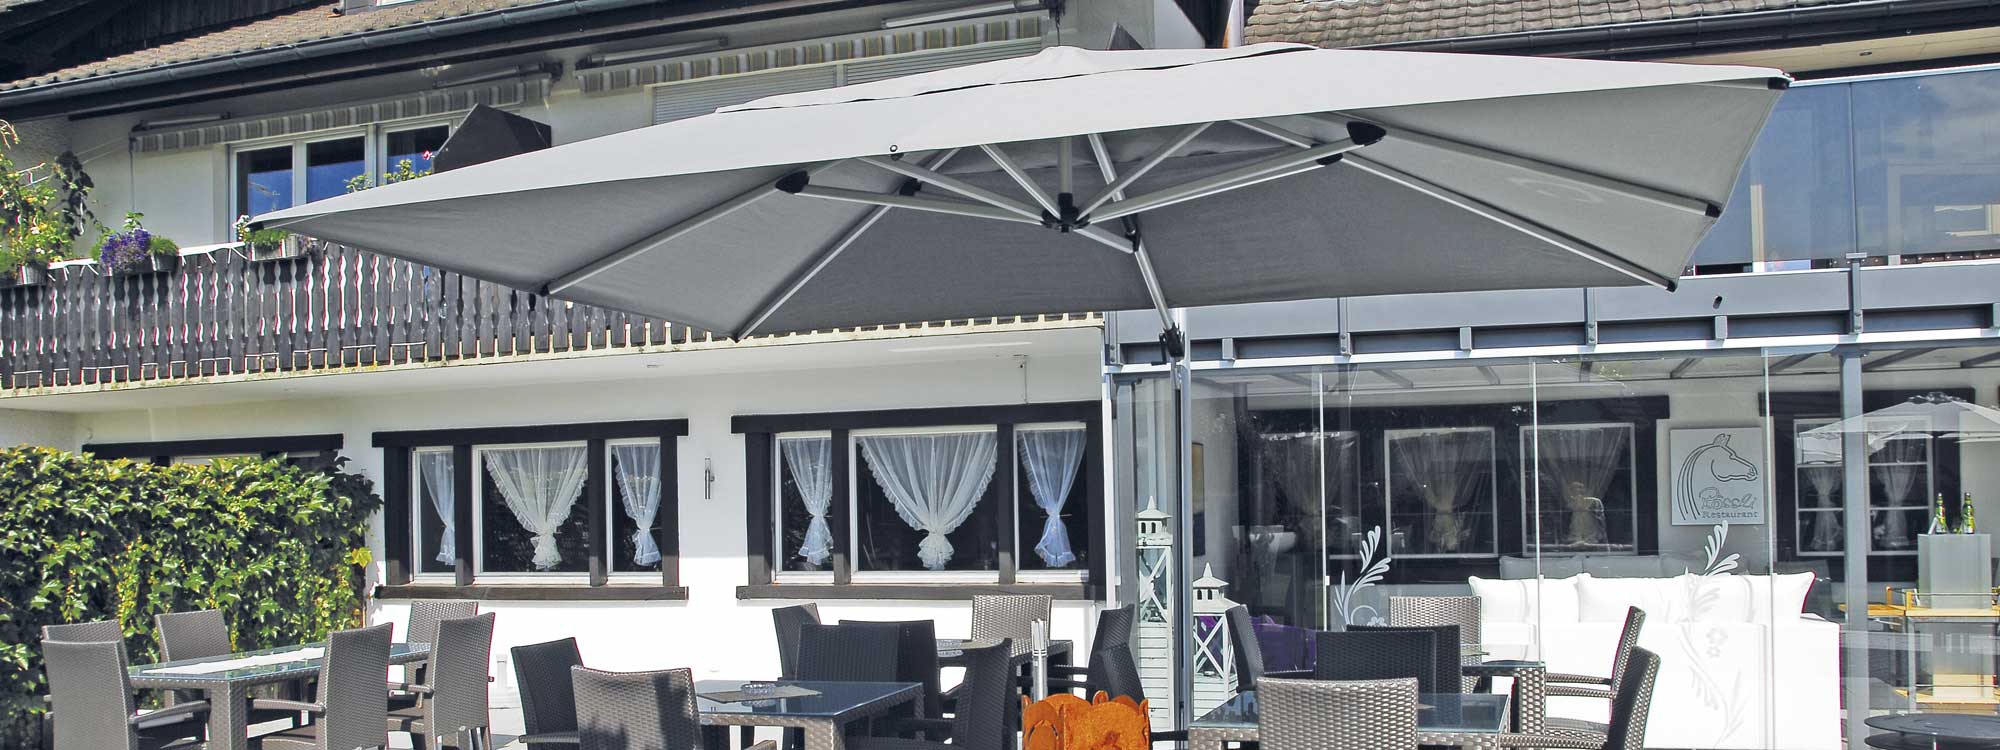 Image of Shademaker Polaris large cantilever parasol with taupe canopy, shown on hotel terrace above bistro furniture